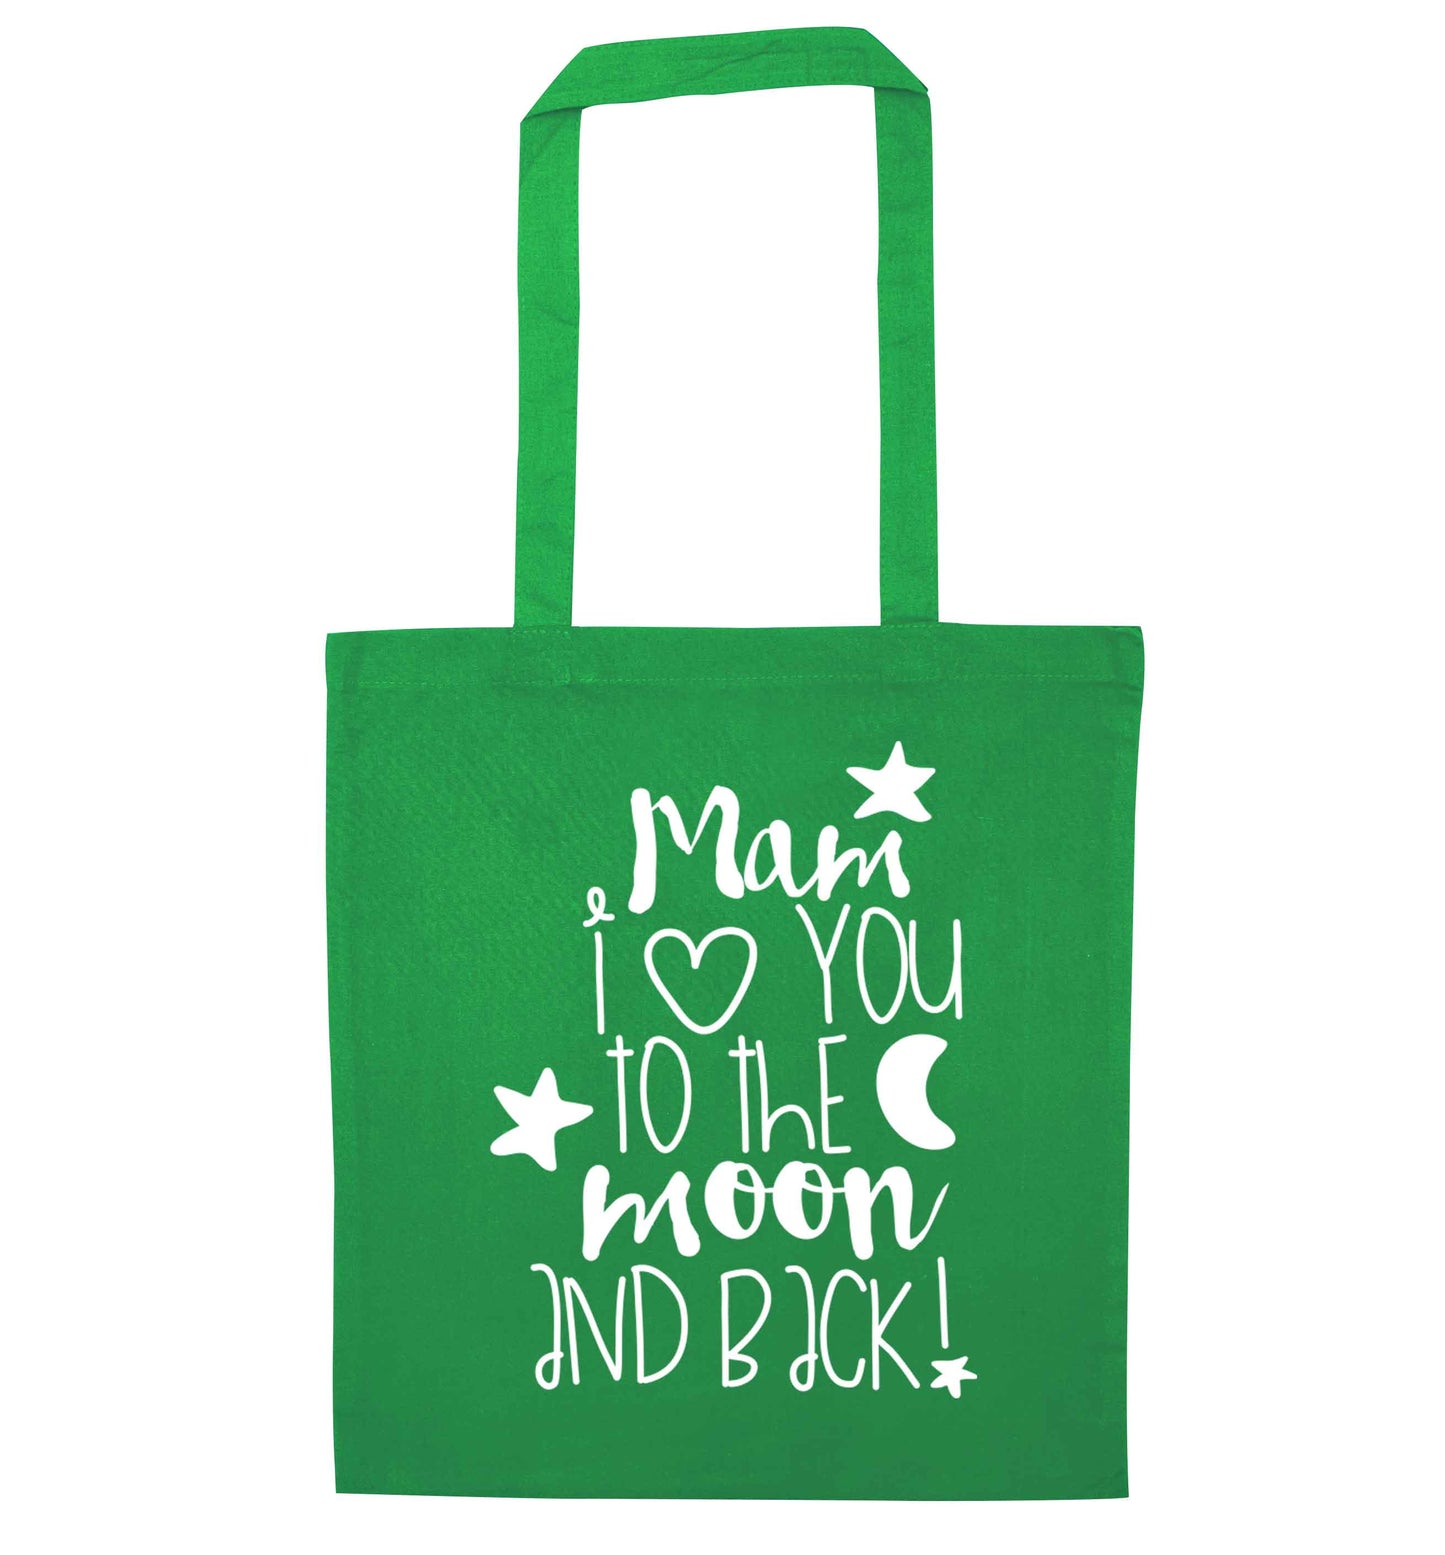 Mam I love you to the moon and back green tote bag